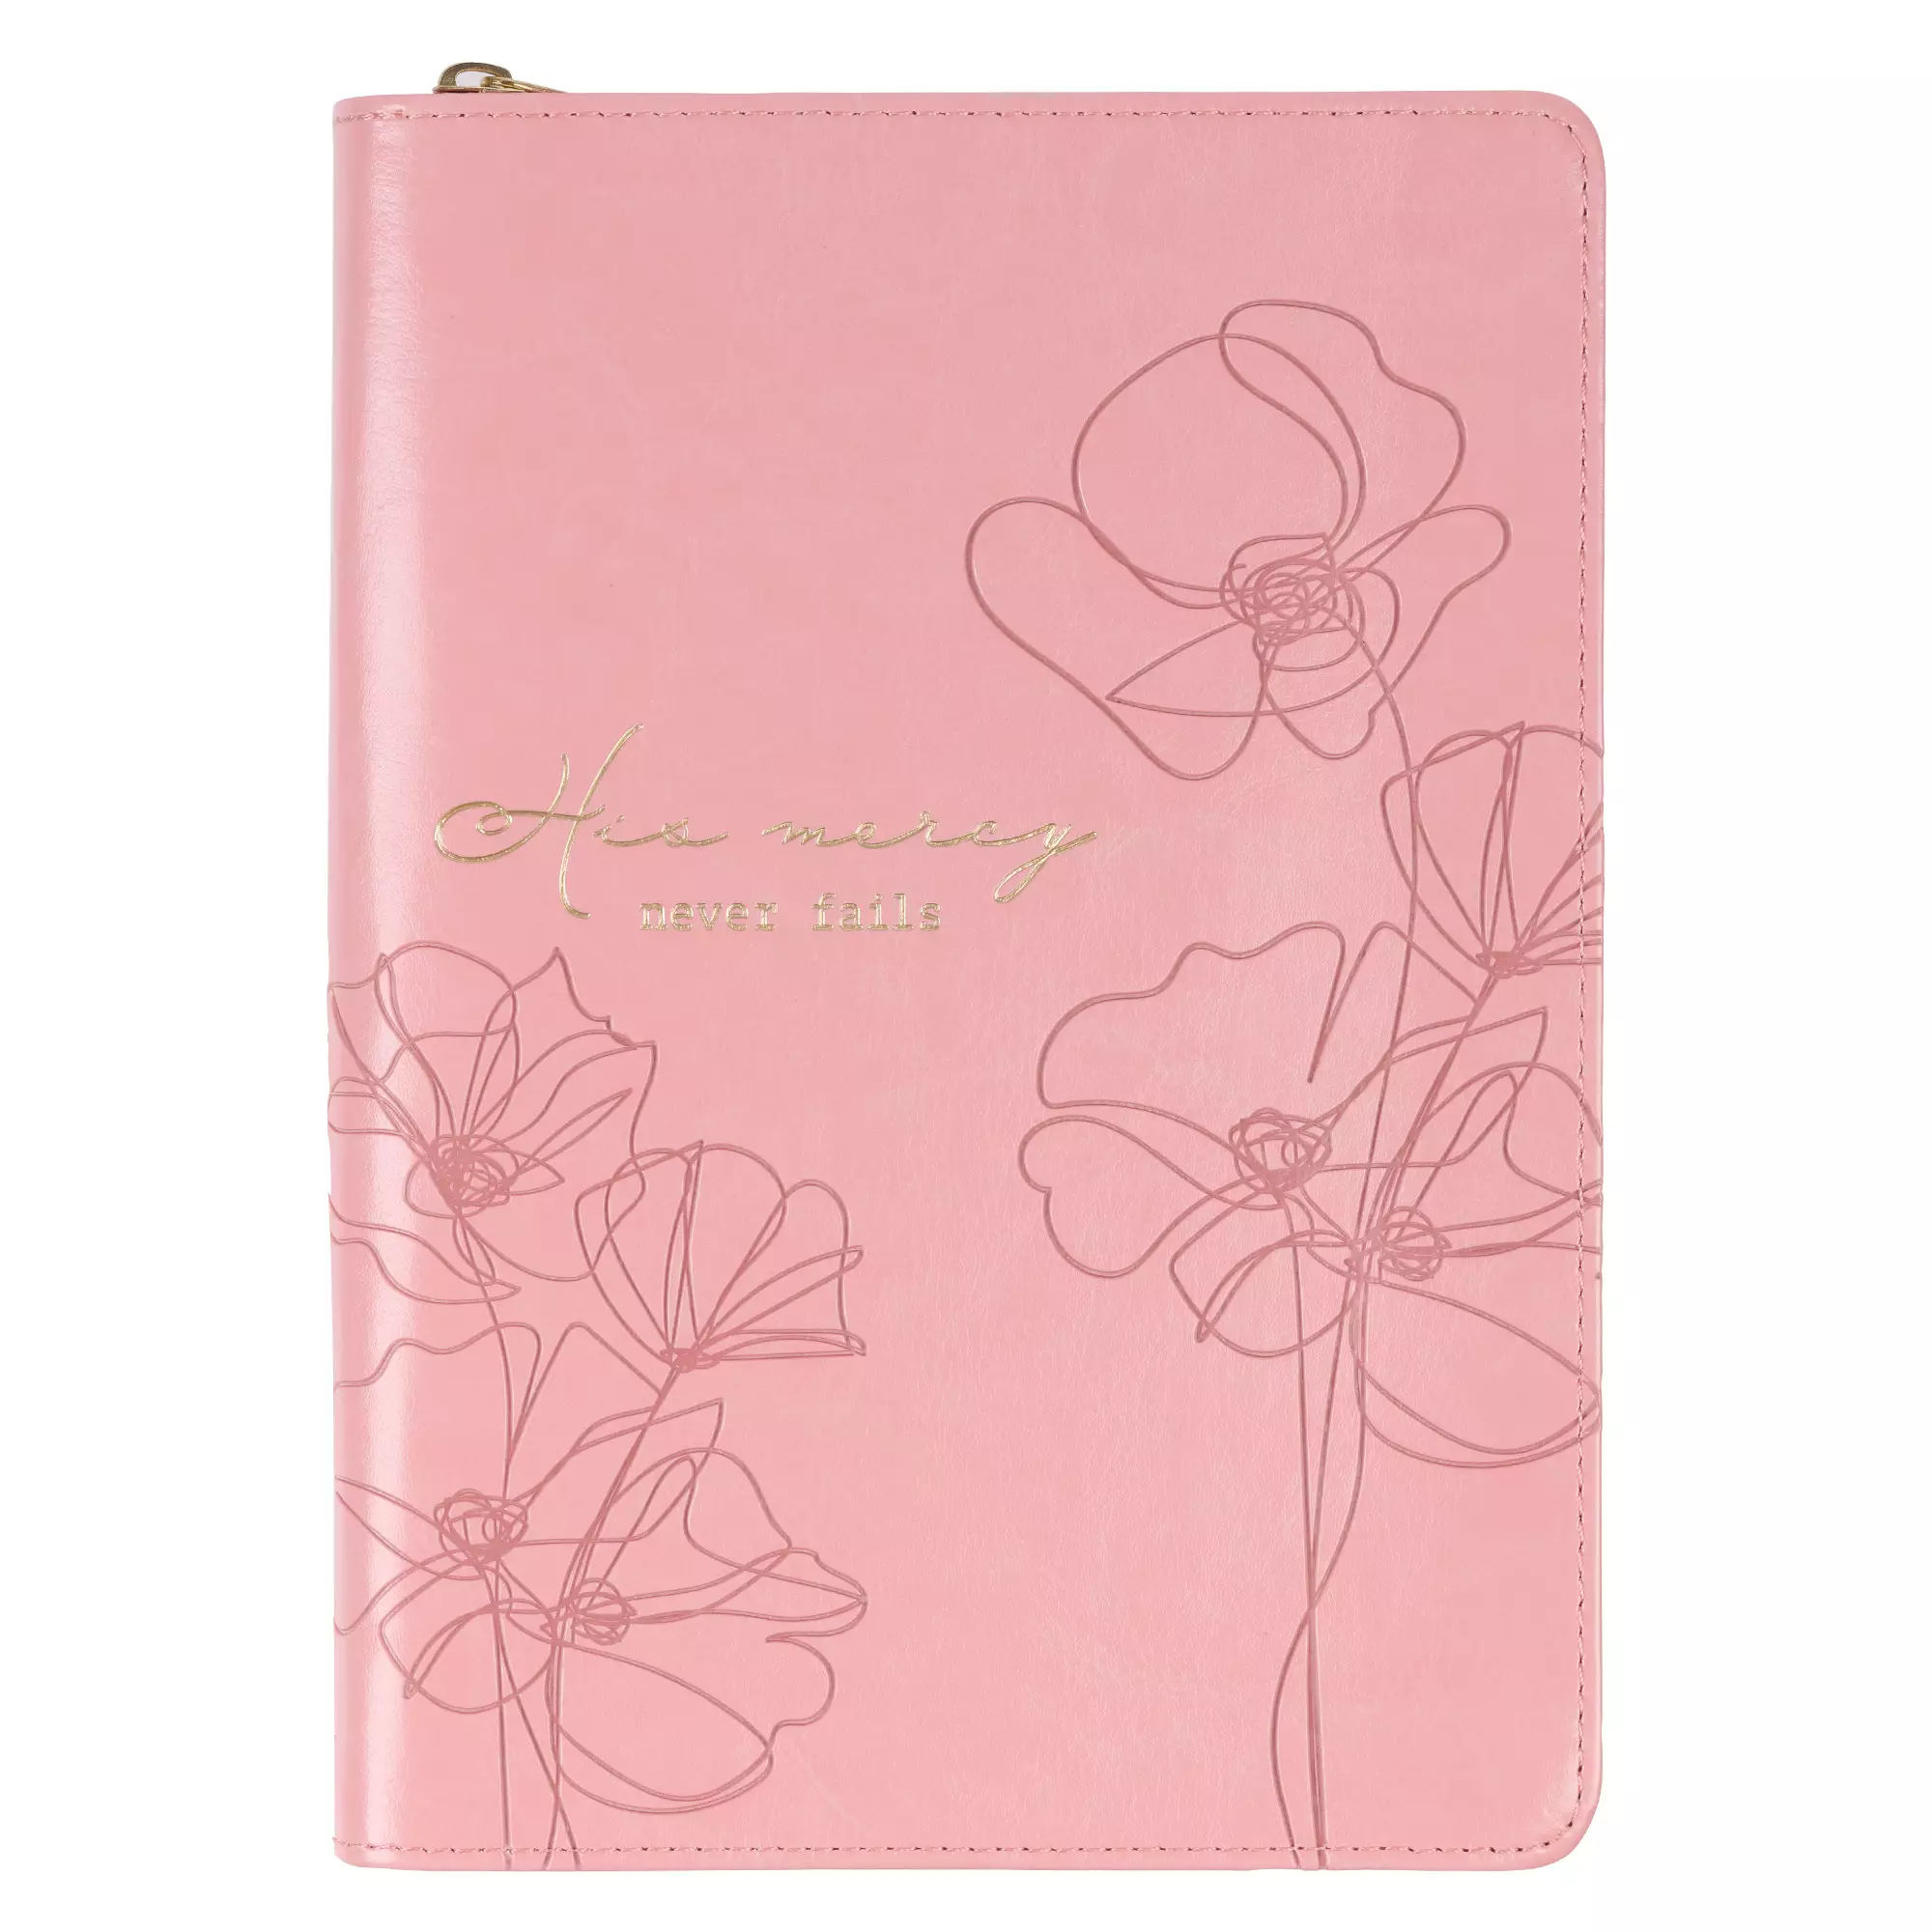 His Mercy Never Fails Journal: Ribbon Marker, Pink Faux Leather Flexcover, Zipper Closure